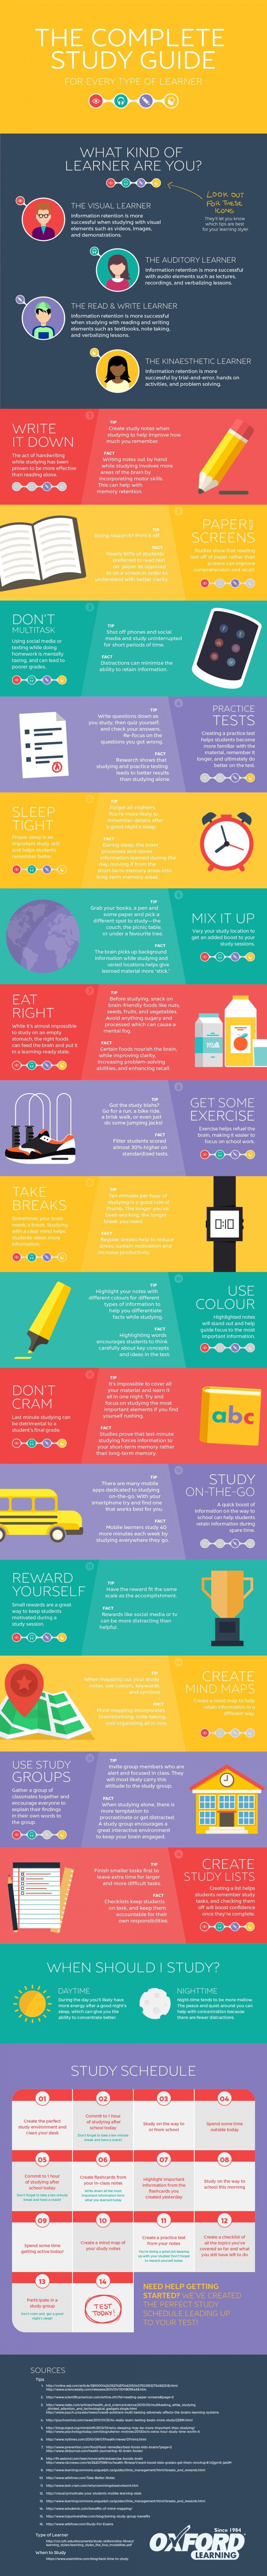 The Complete Study Guide Infographic